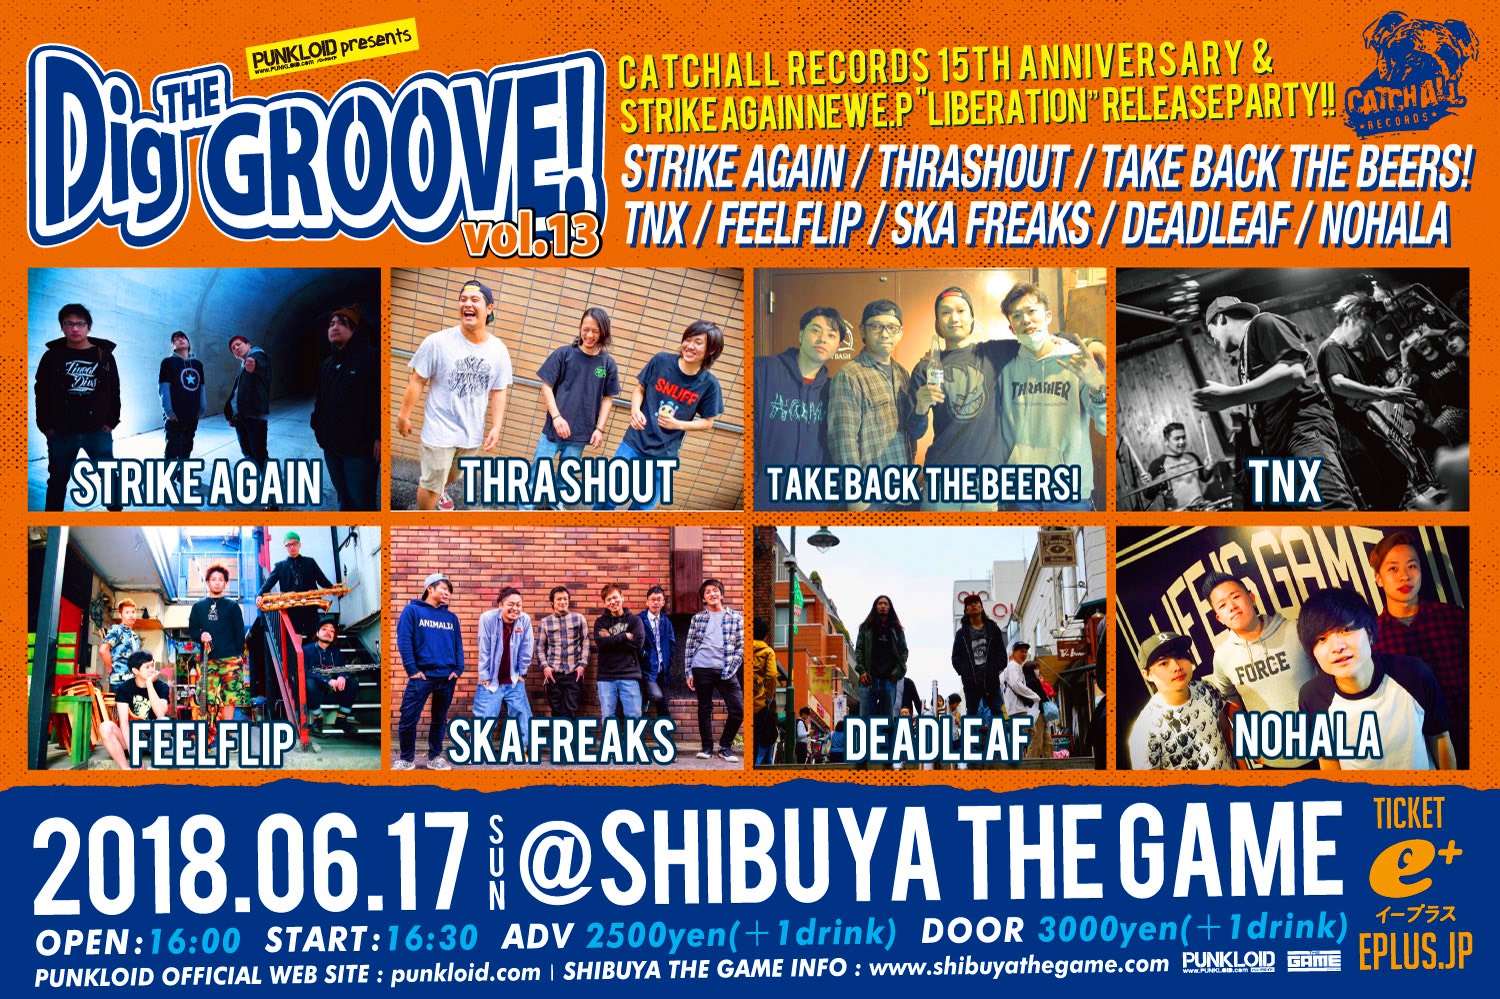 Dig THE GROOVE vol.13